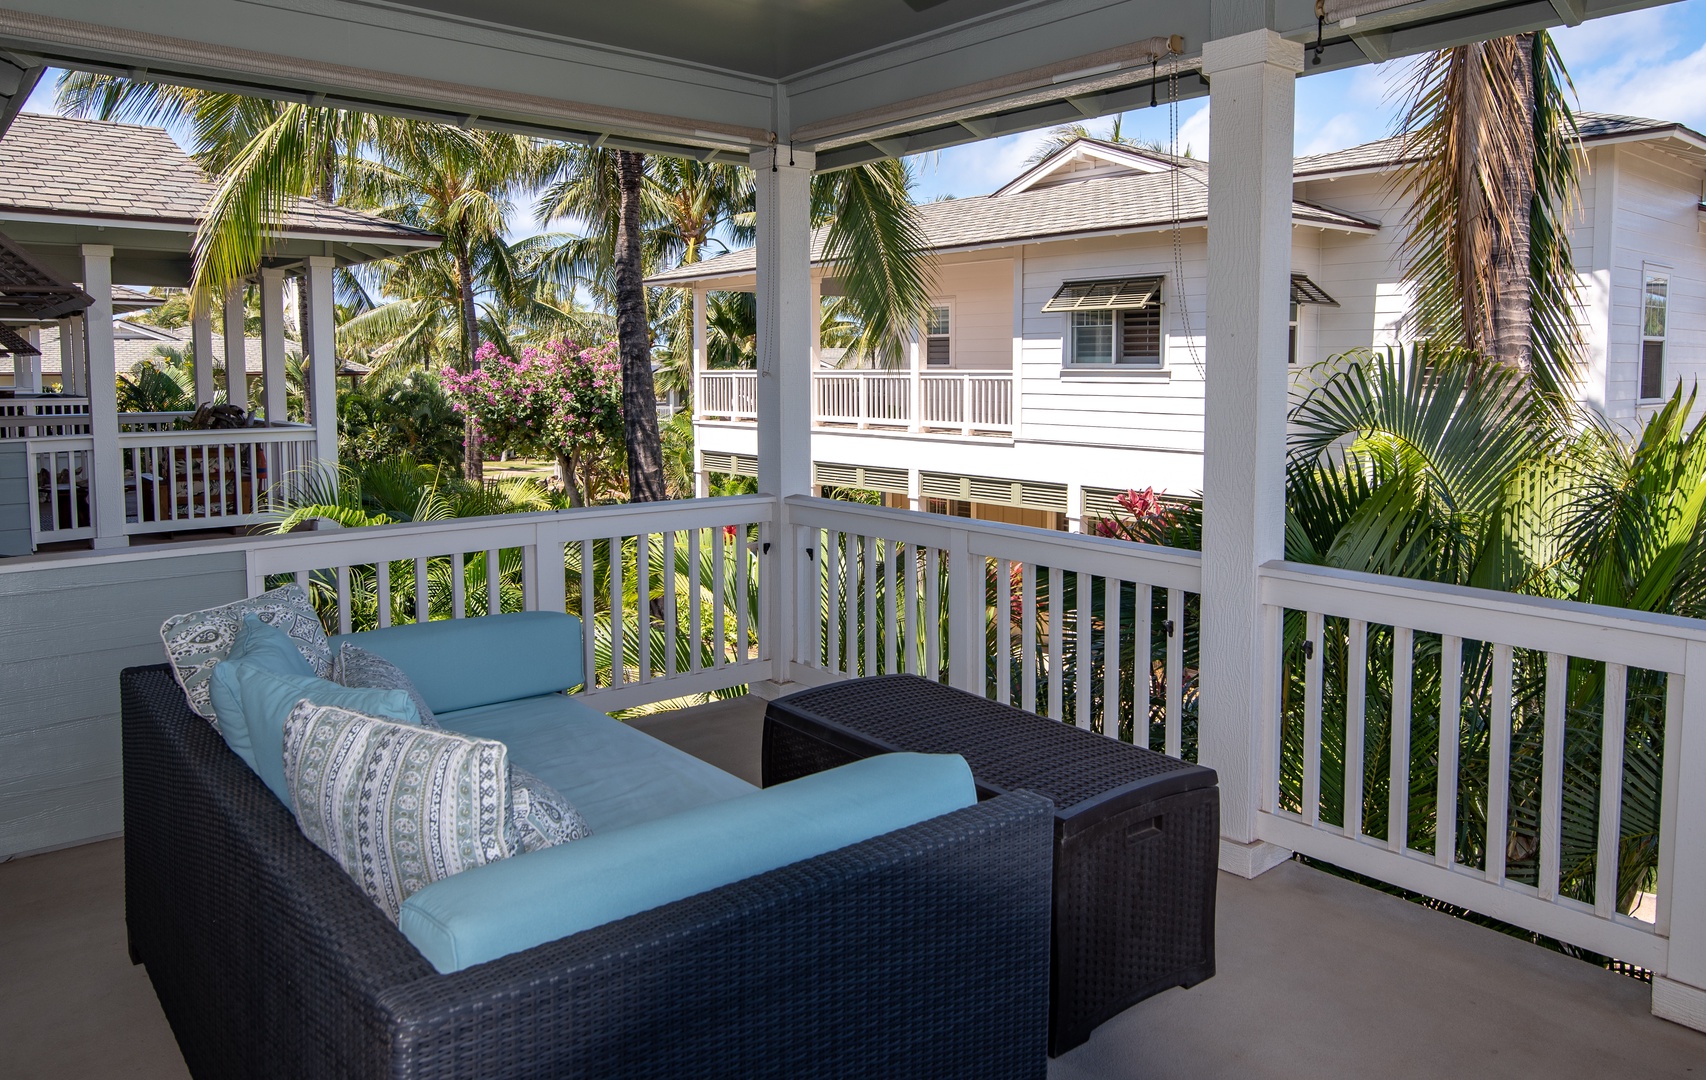 Kapolei Vacation Rentals, Coconut Plantation 1200-4 - The private lanai is a great space to relax.